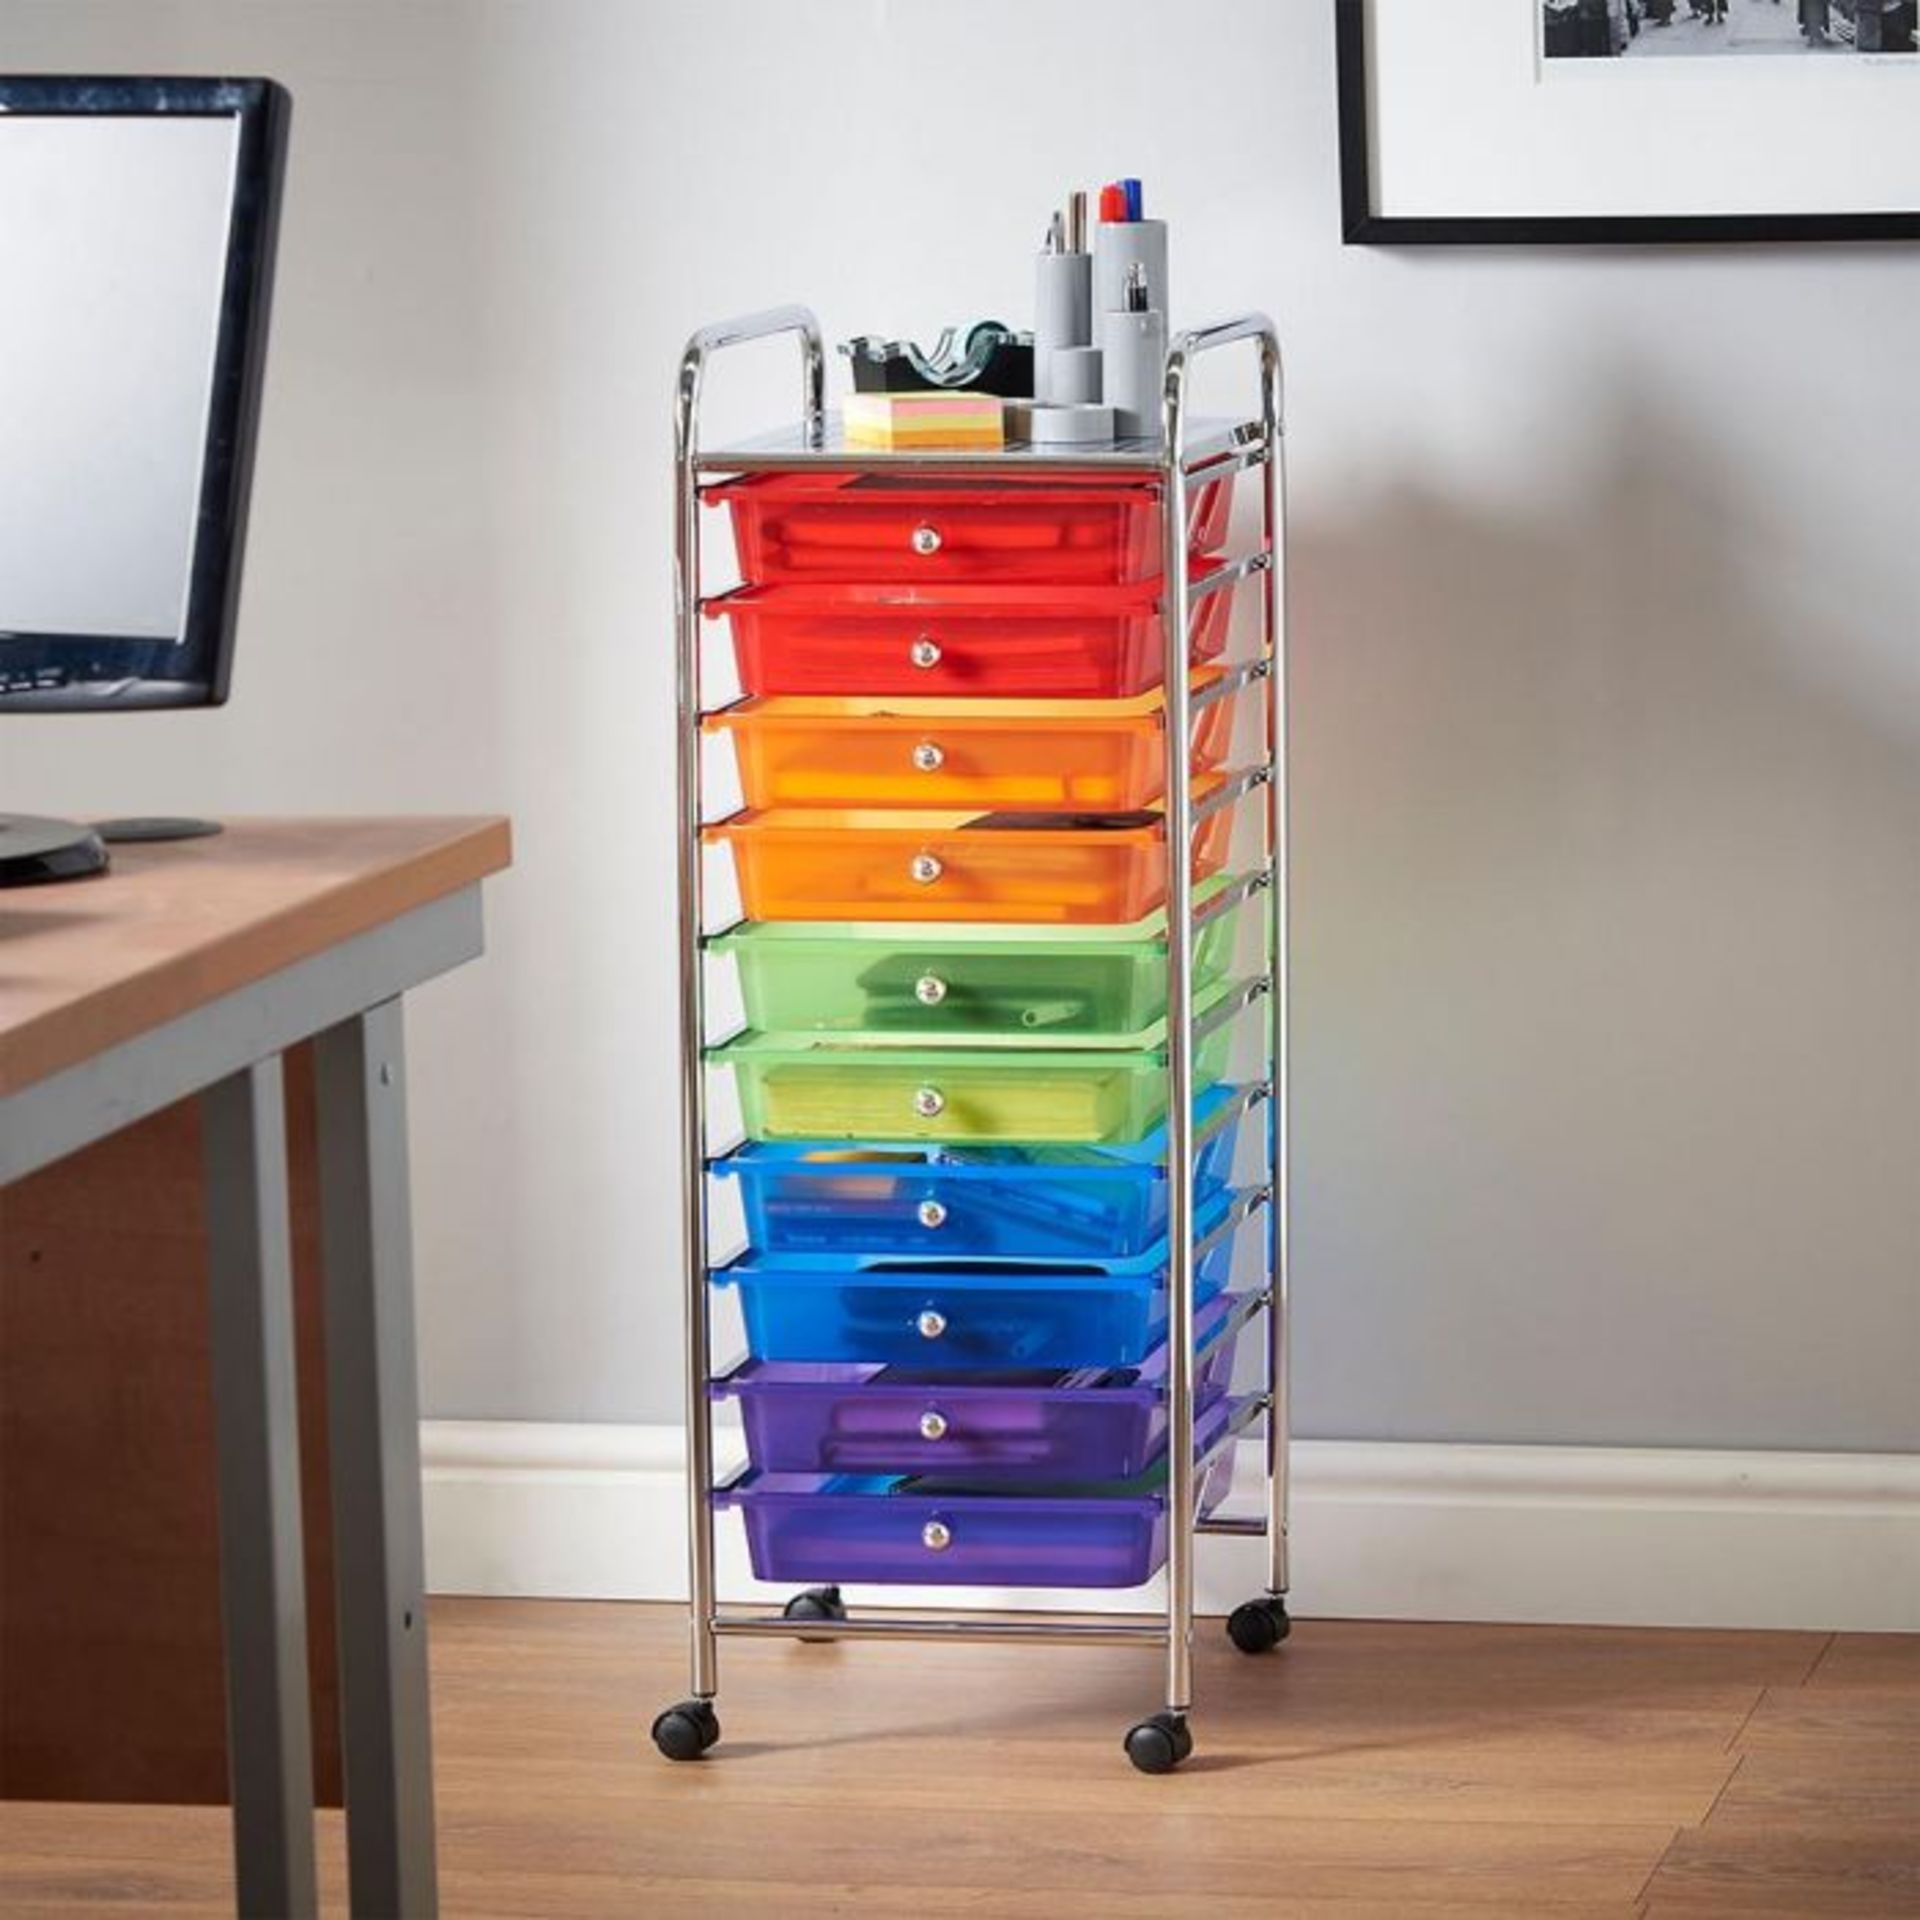 (V84) 10 Drawer Trolley - Multi Colour Versatile 10 drawer storage trolley - great for homes, ... - Image 3 of 4